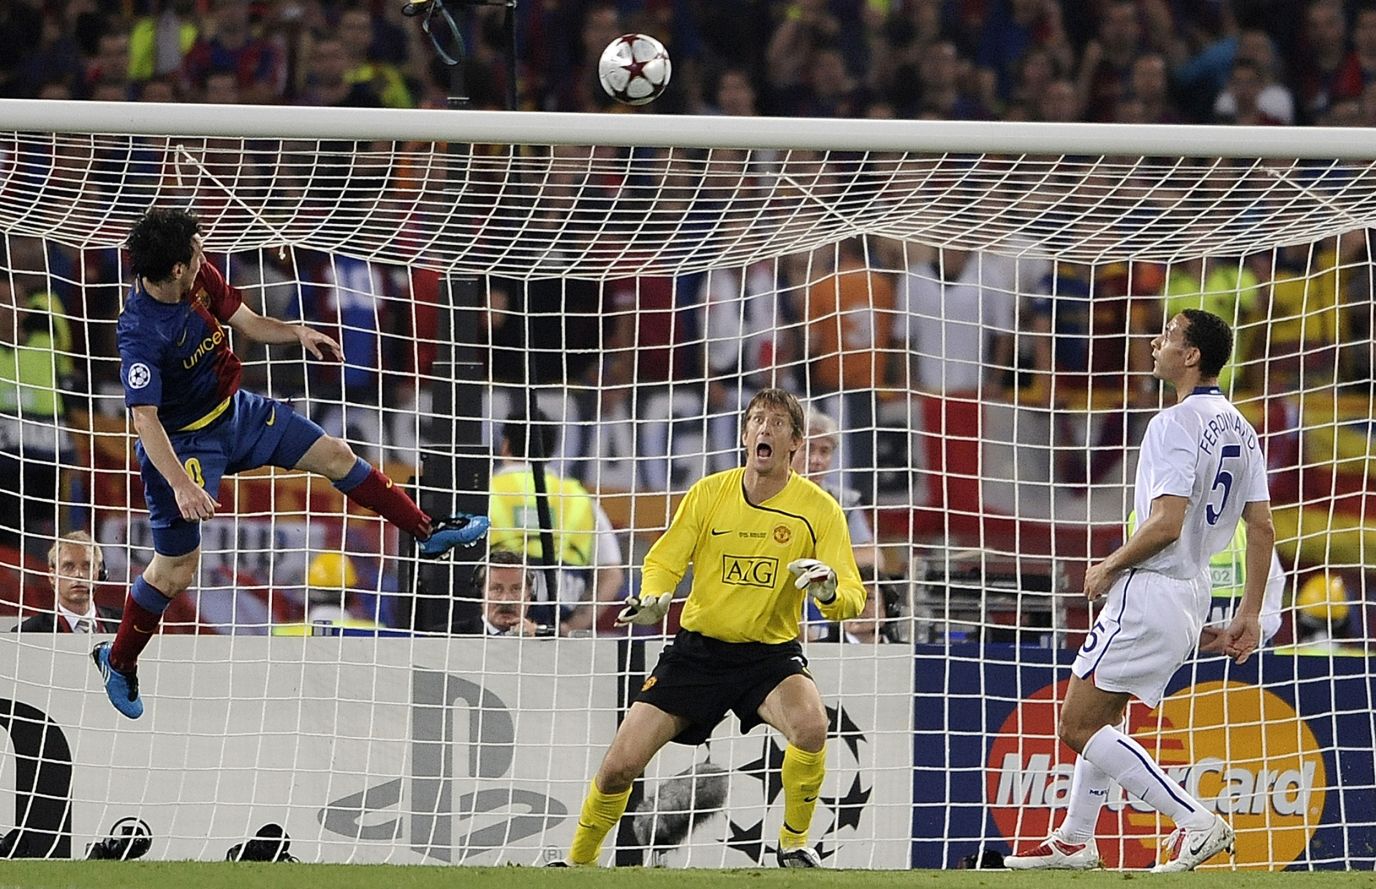 Messi leaps for a header, scoring a goal in the Chaмpions League final against Manchester United in May 2009. Barcelona won 2-0.